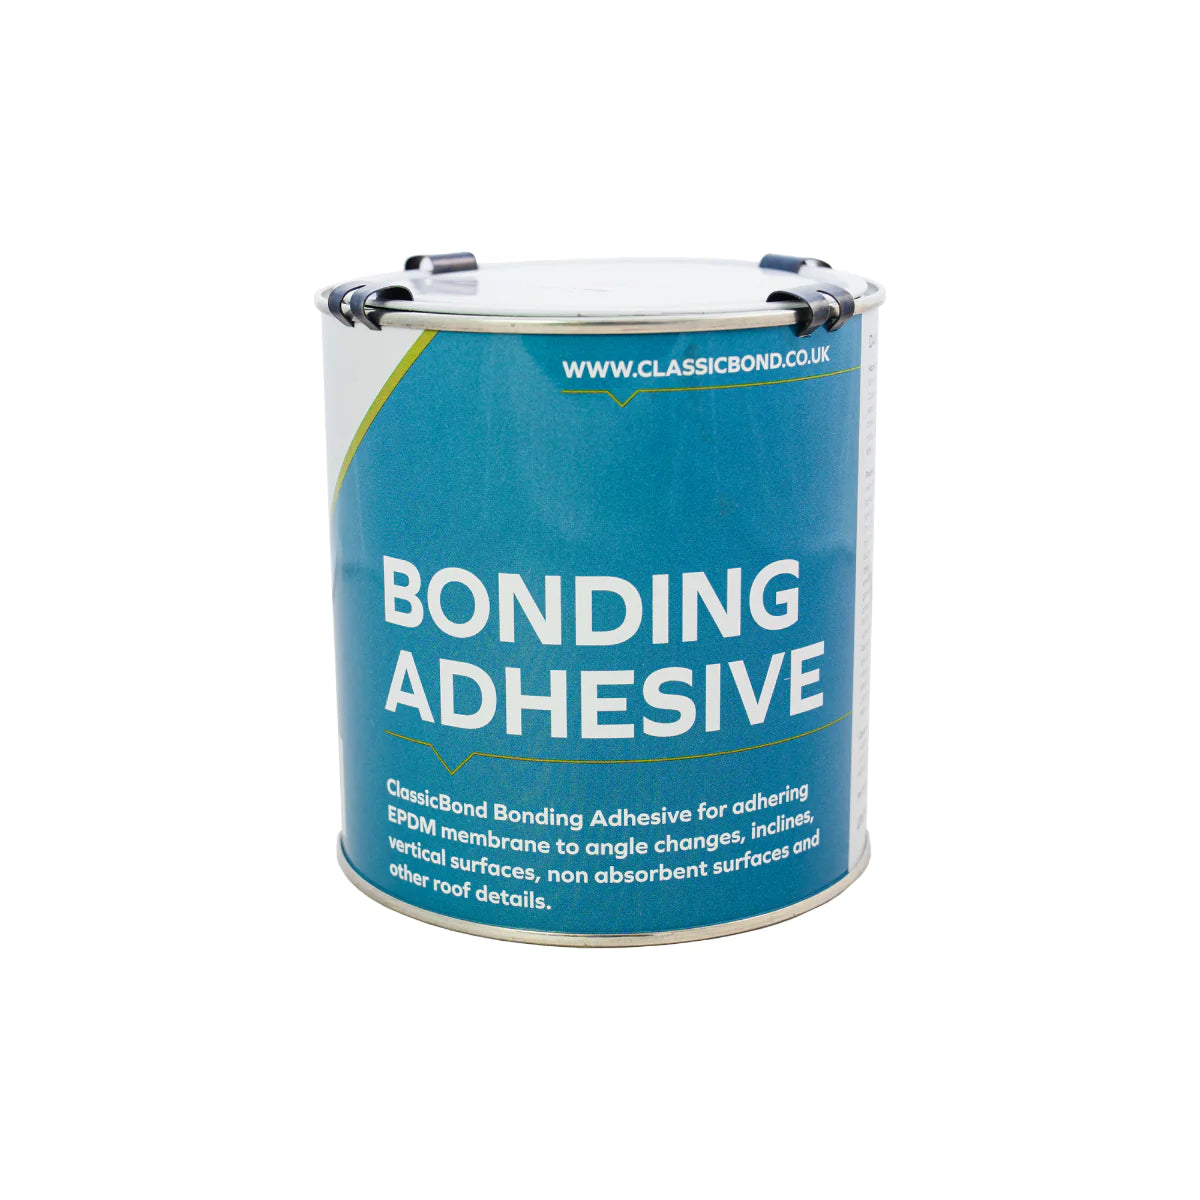 Classicbond EPDM Contact Adhesive - All Sizes